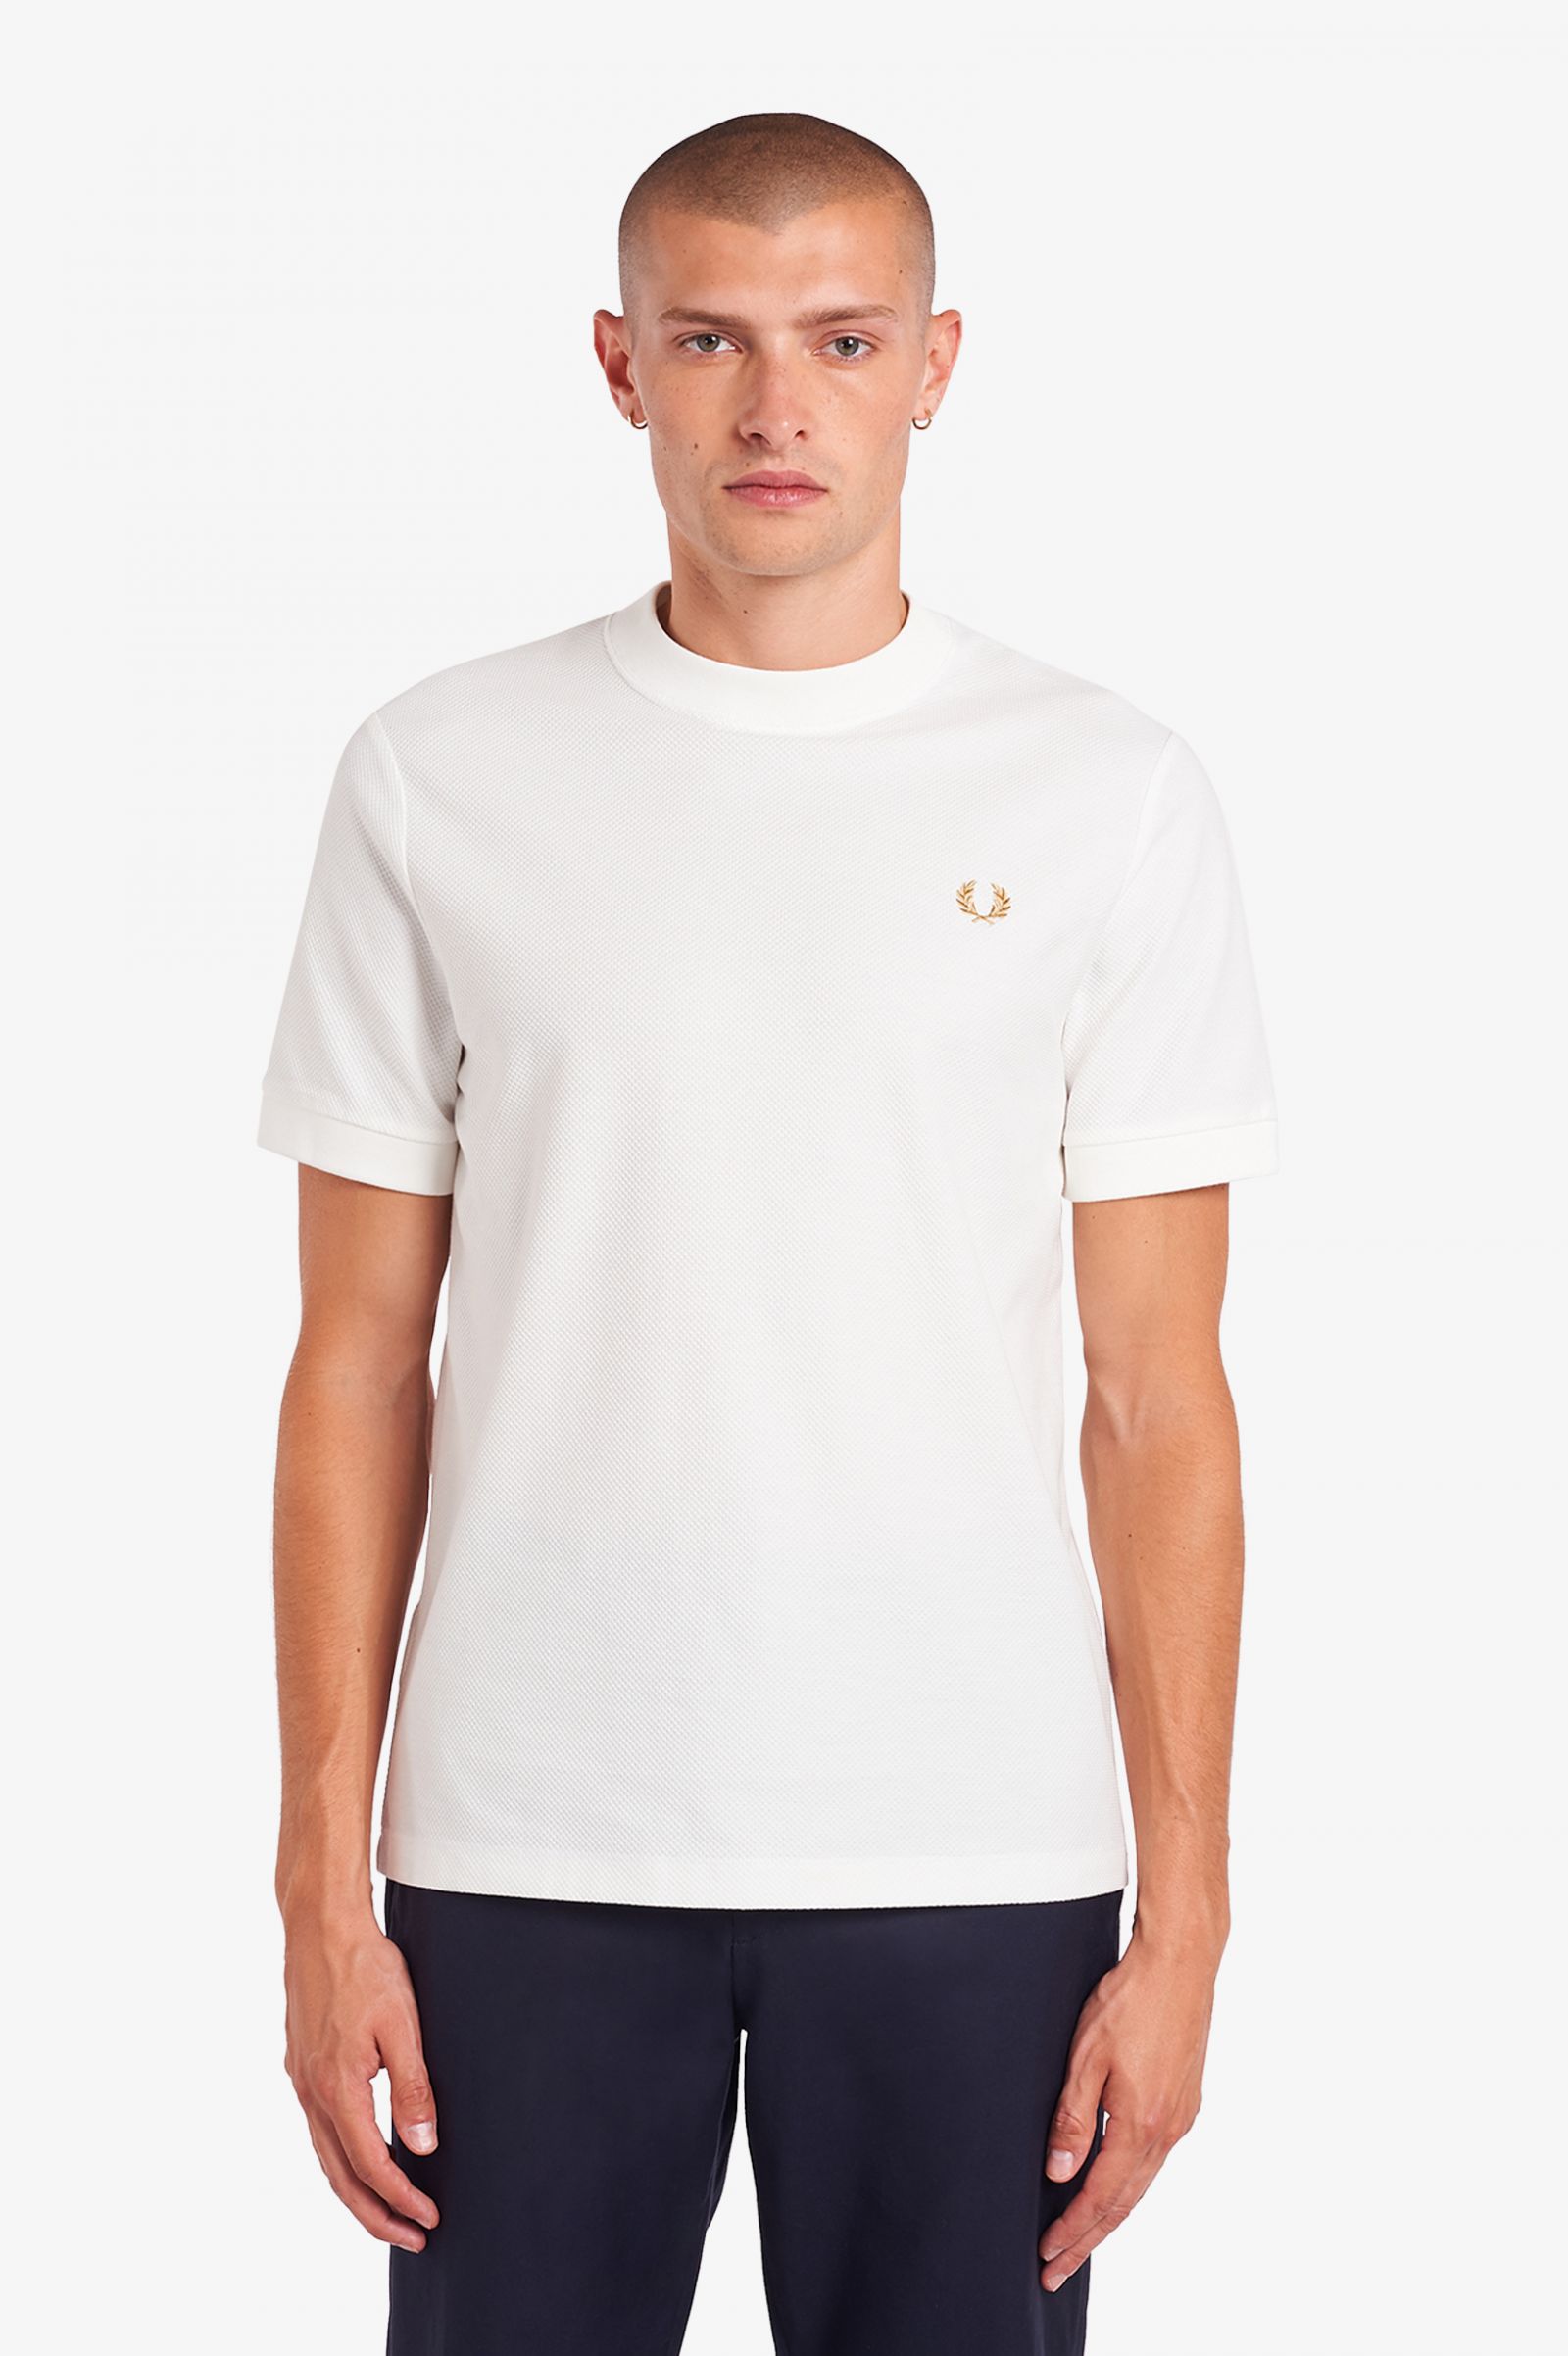 Pique T Shirt Snow White Men S T Shirts Designer T Shirts For Men Fred Perry Uk